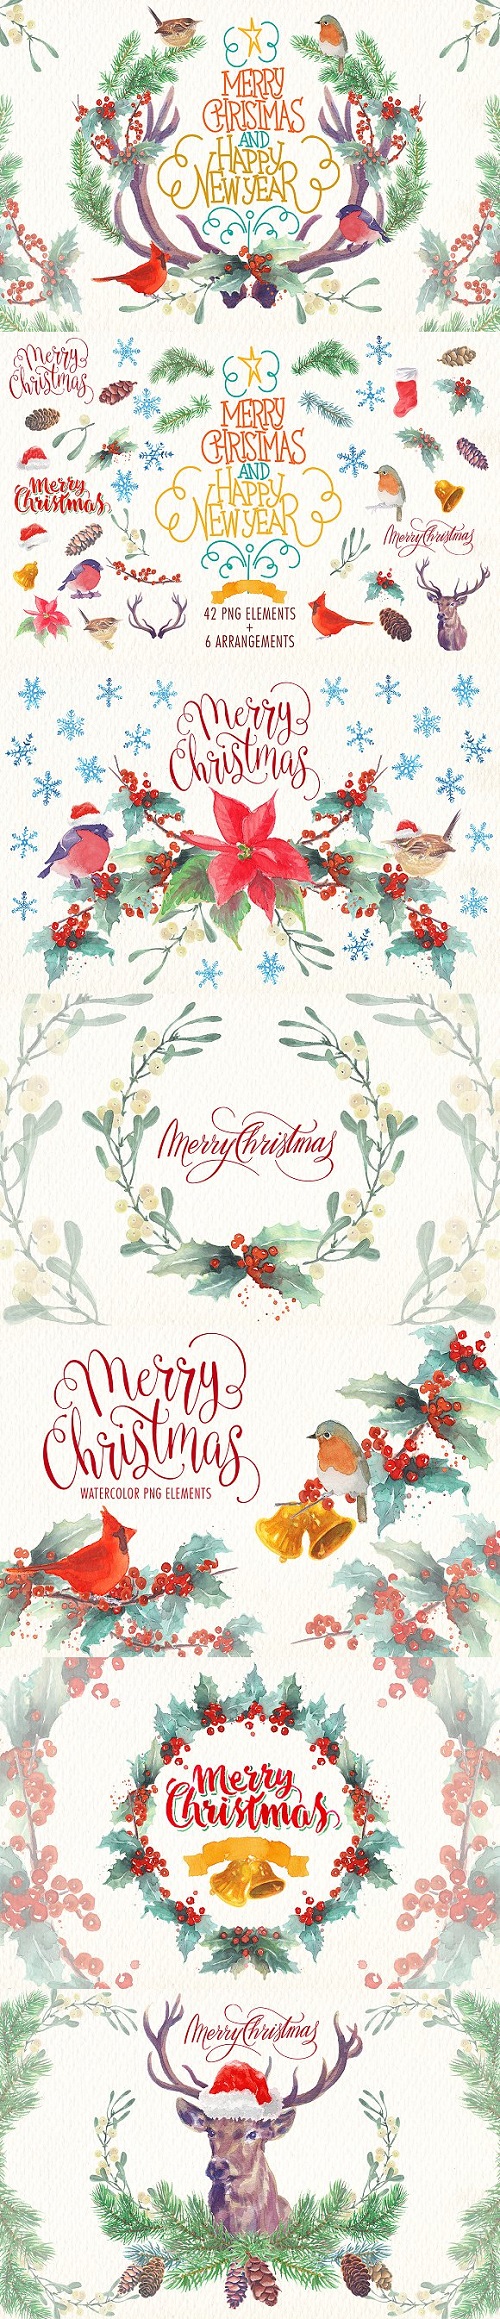 Watercolor christmas png elements 1949984